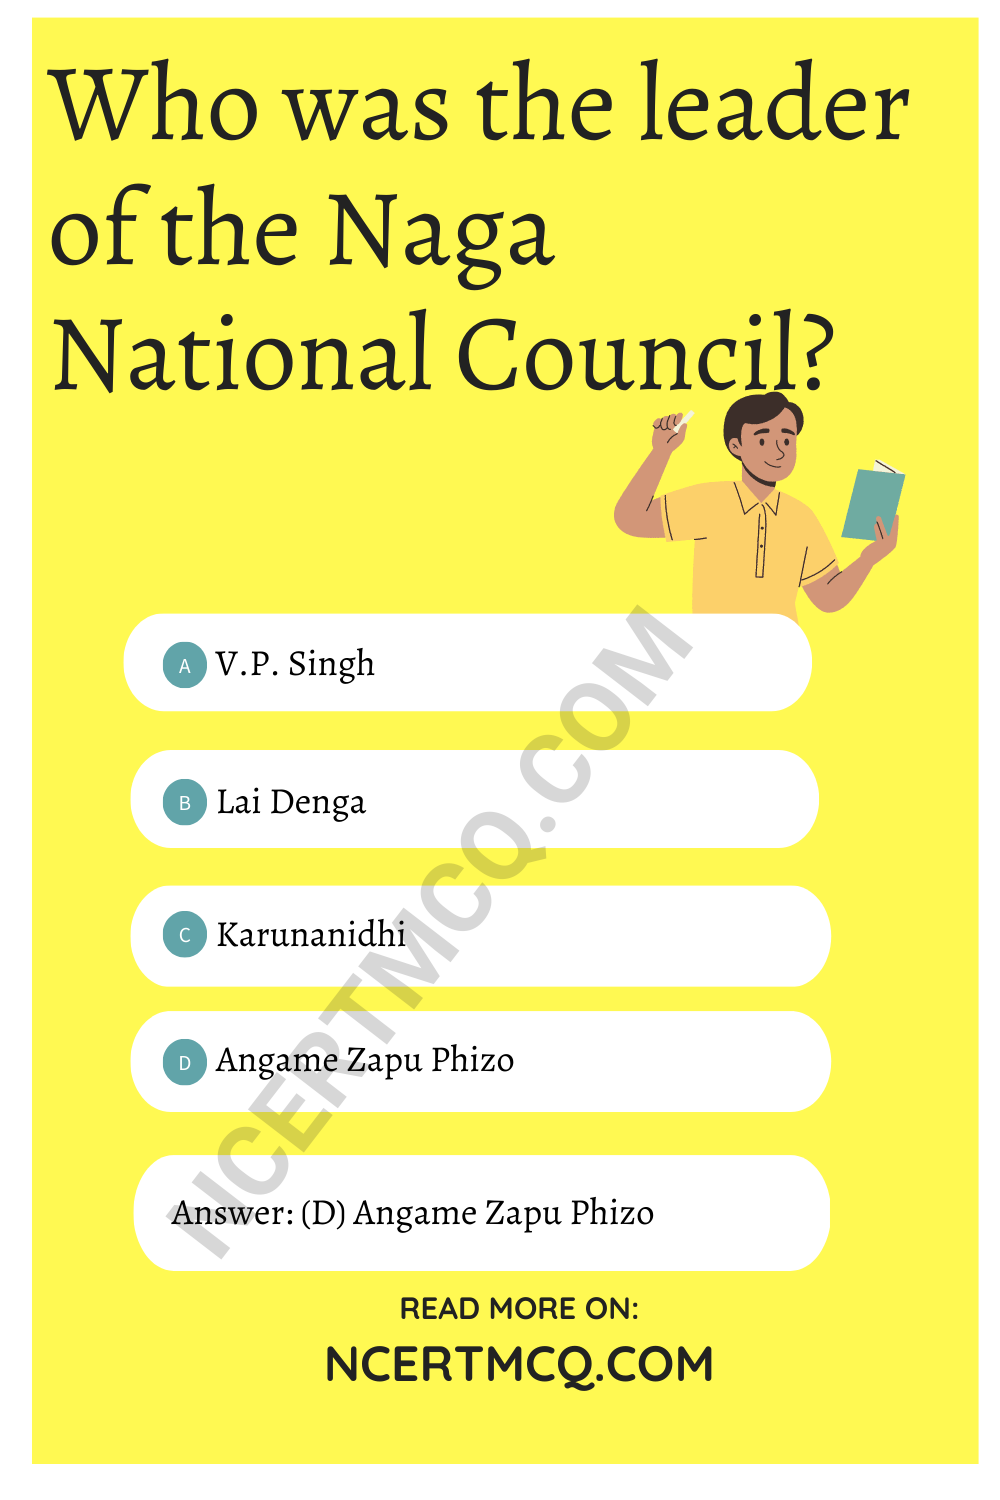 Who was the leader of the Naga National Council?